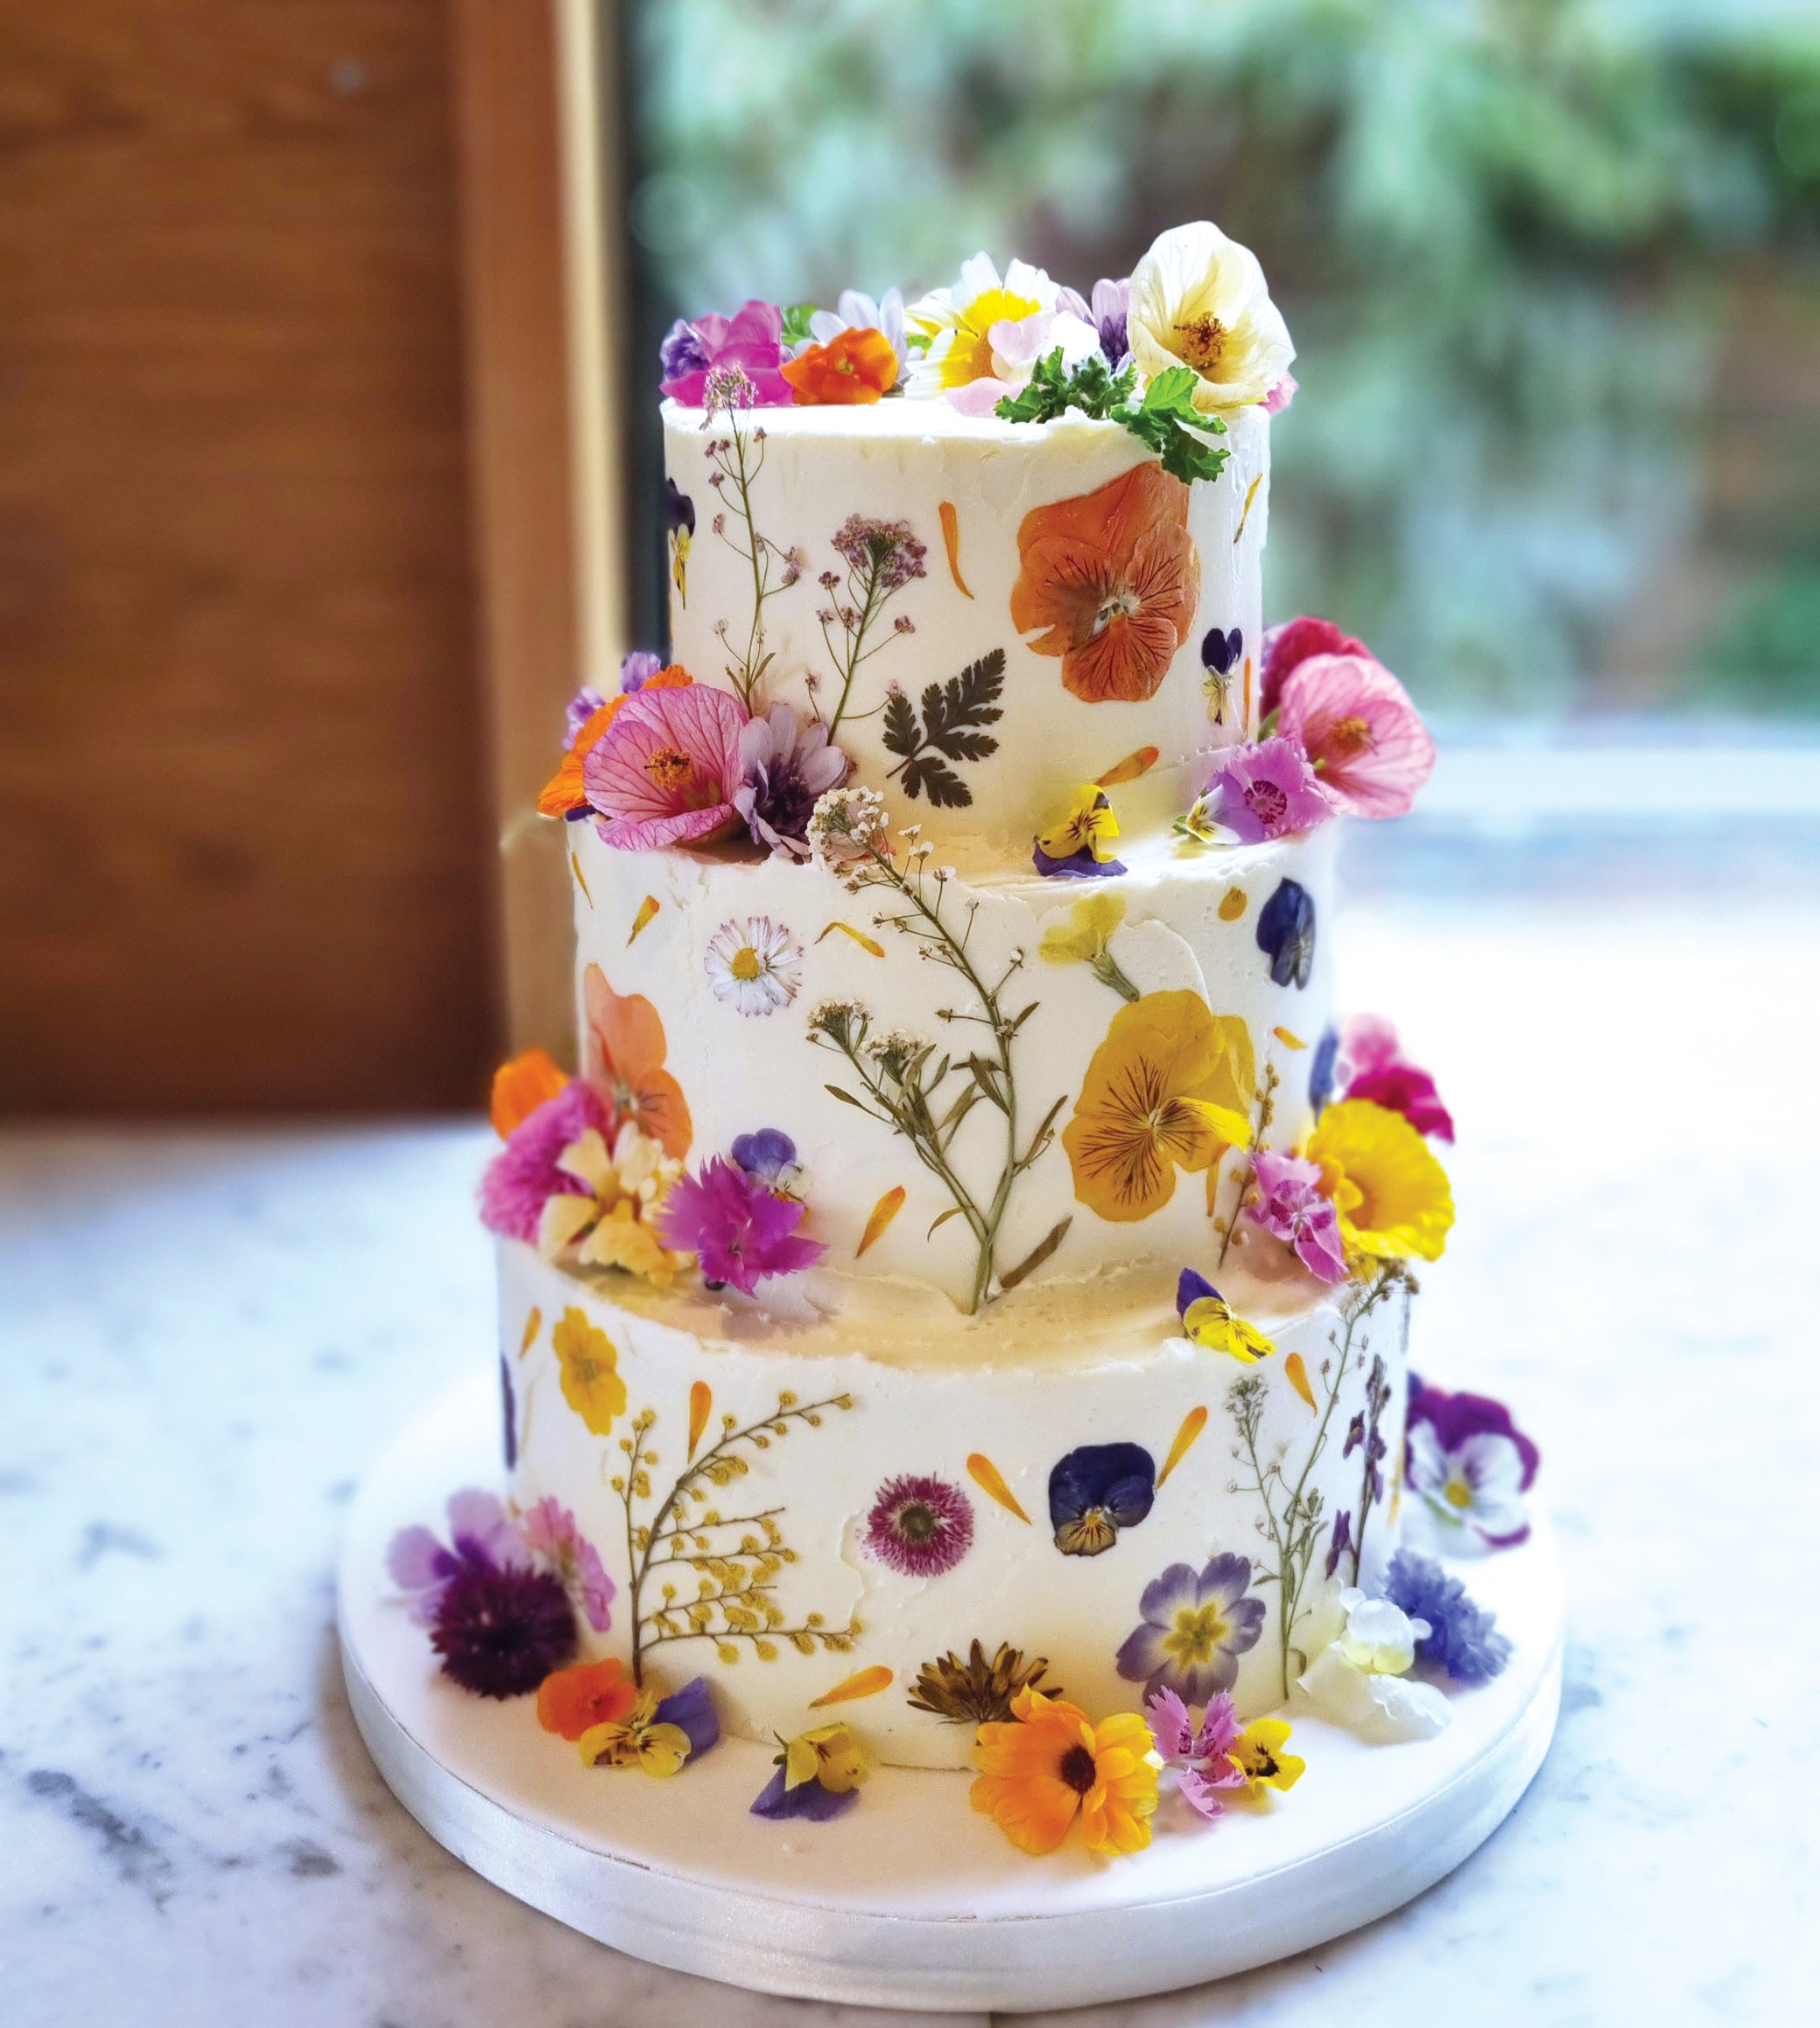 How to use edible flowers for cakes and other bakes